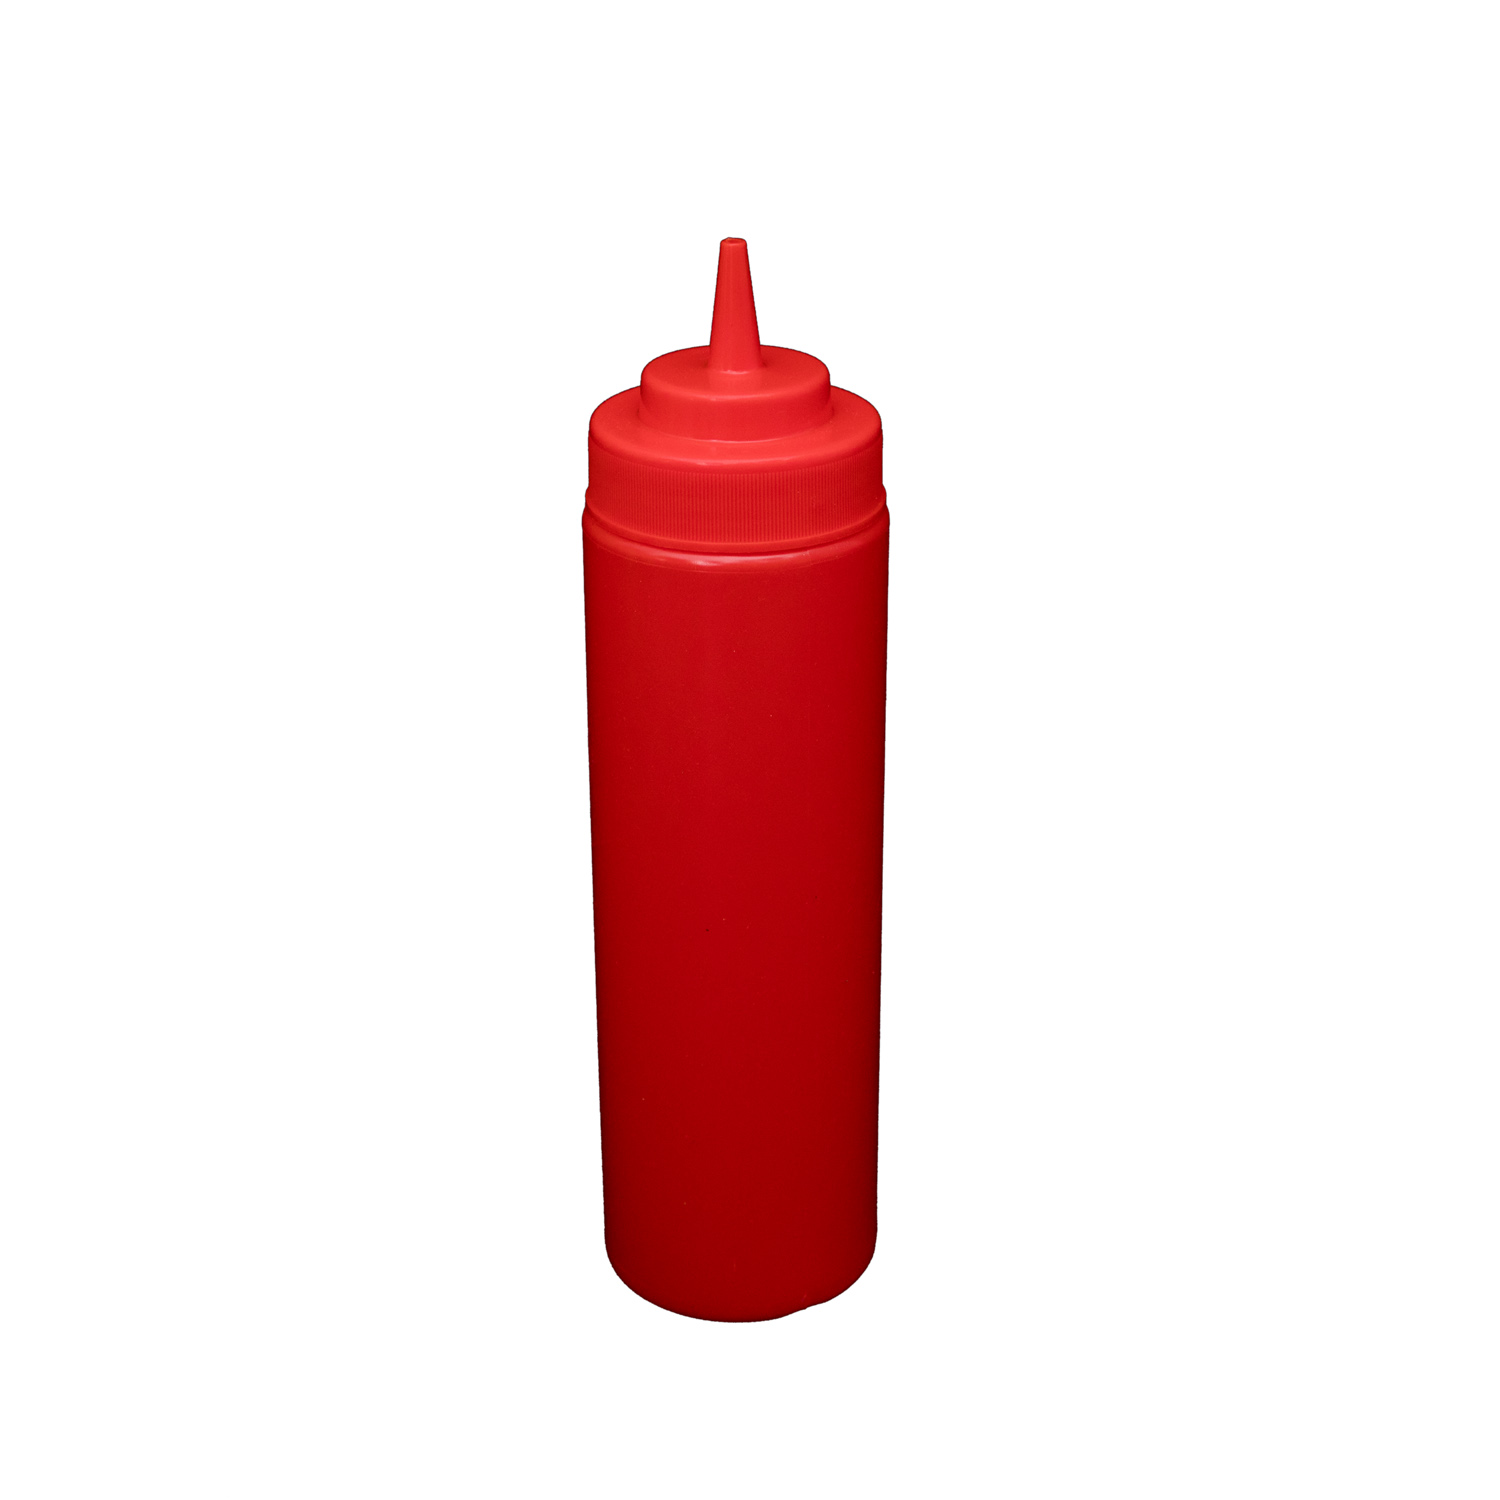 CAC China SQBT-W-24R Red Wide-Mouth Plastic Squeeze Bottle 24 oz.